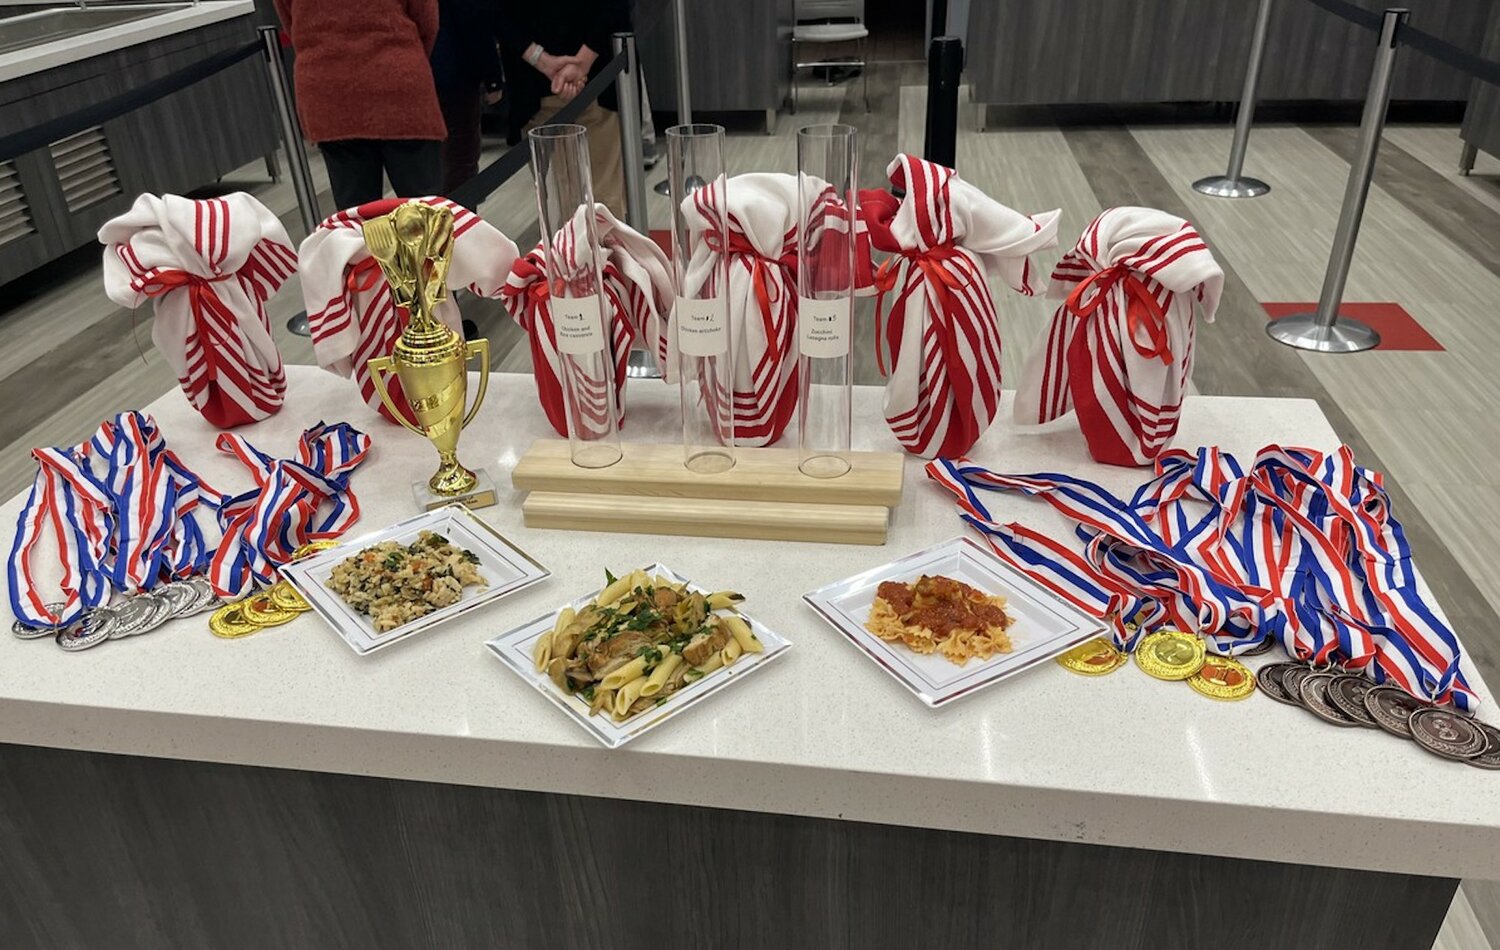 The dishes and the medals.